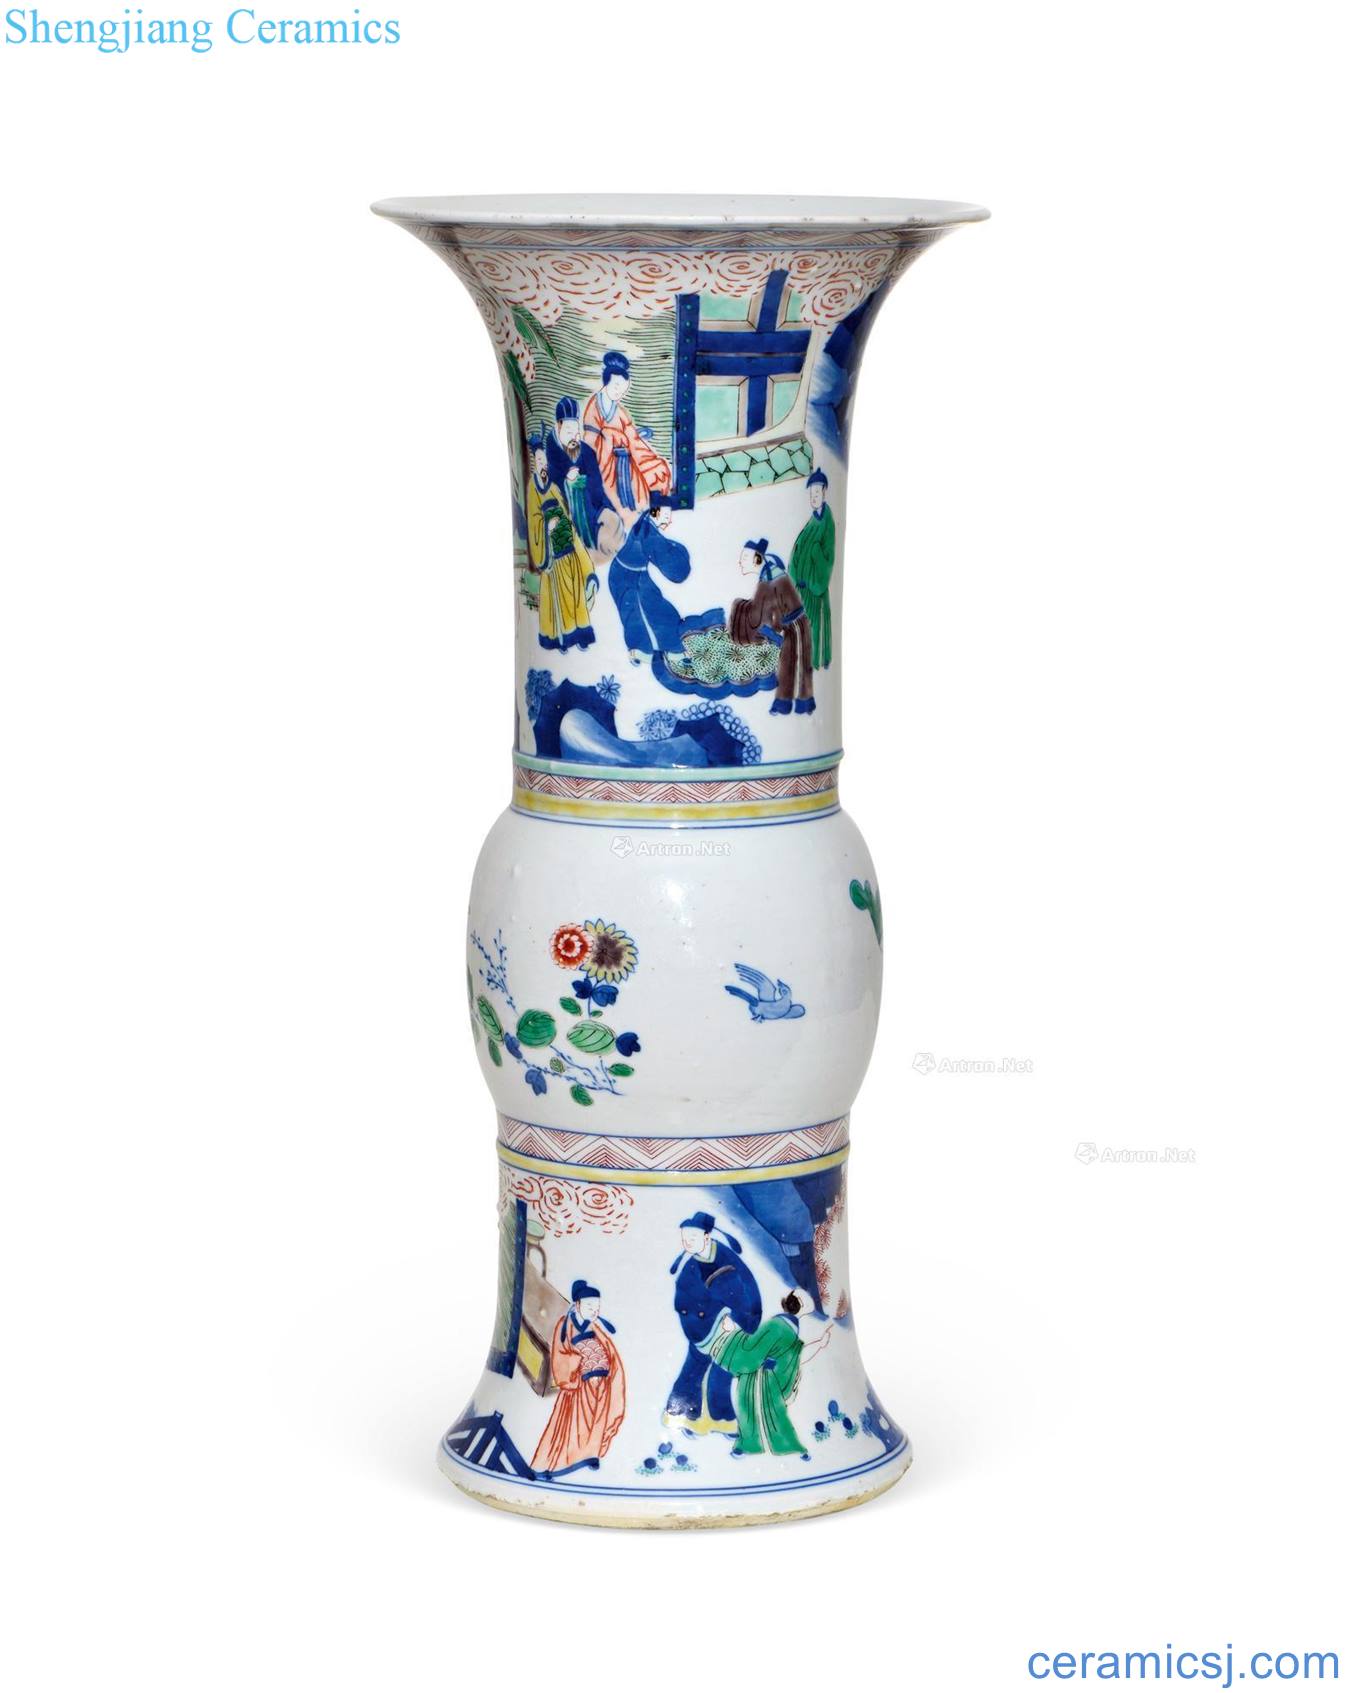 Qing guangxu Flower vase with colorful characters